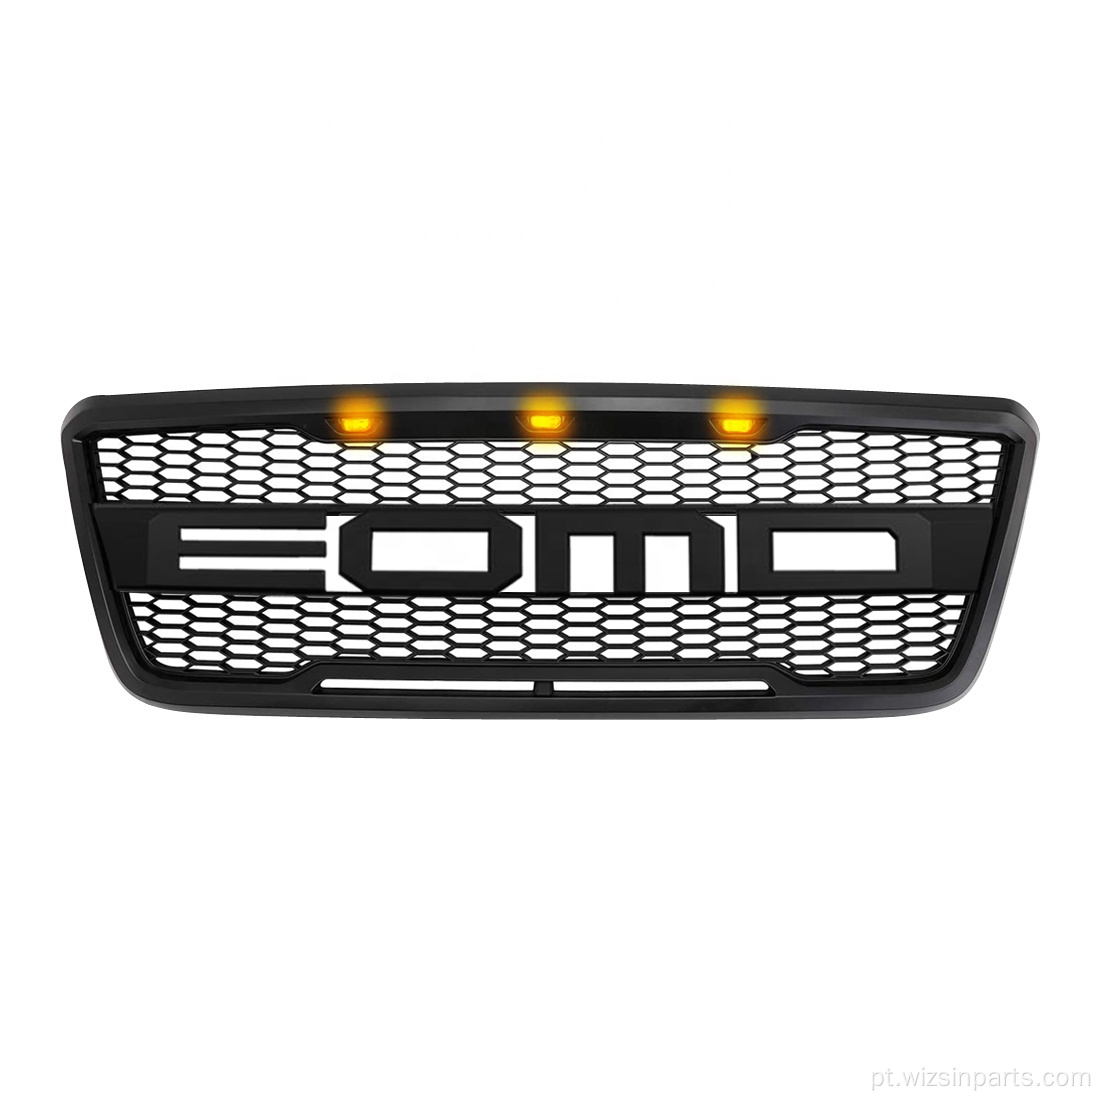 Grille para Ford F150 Ford